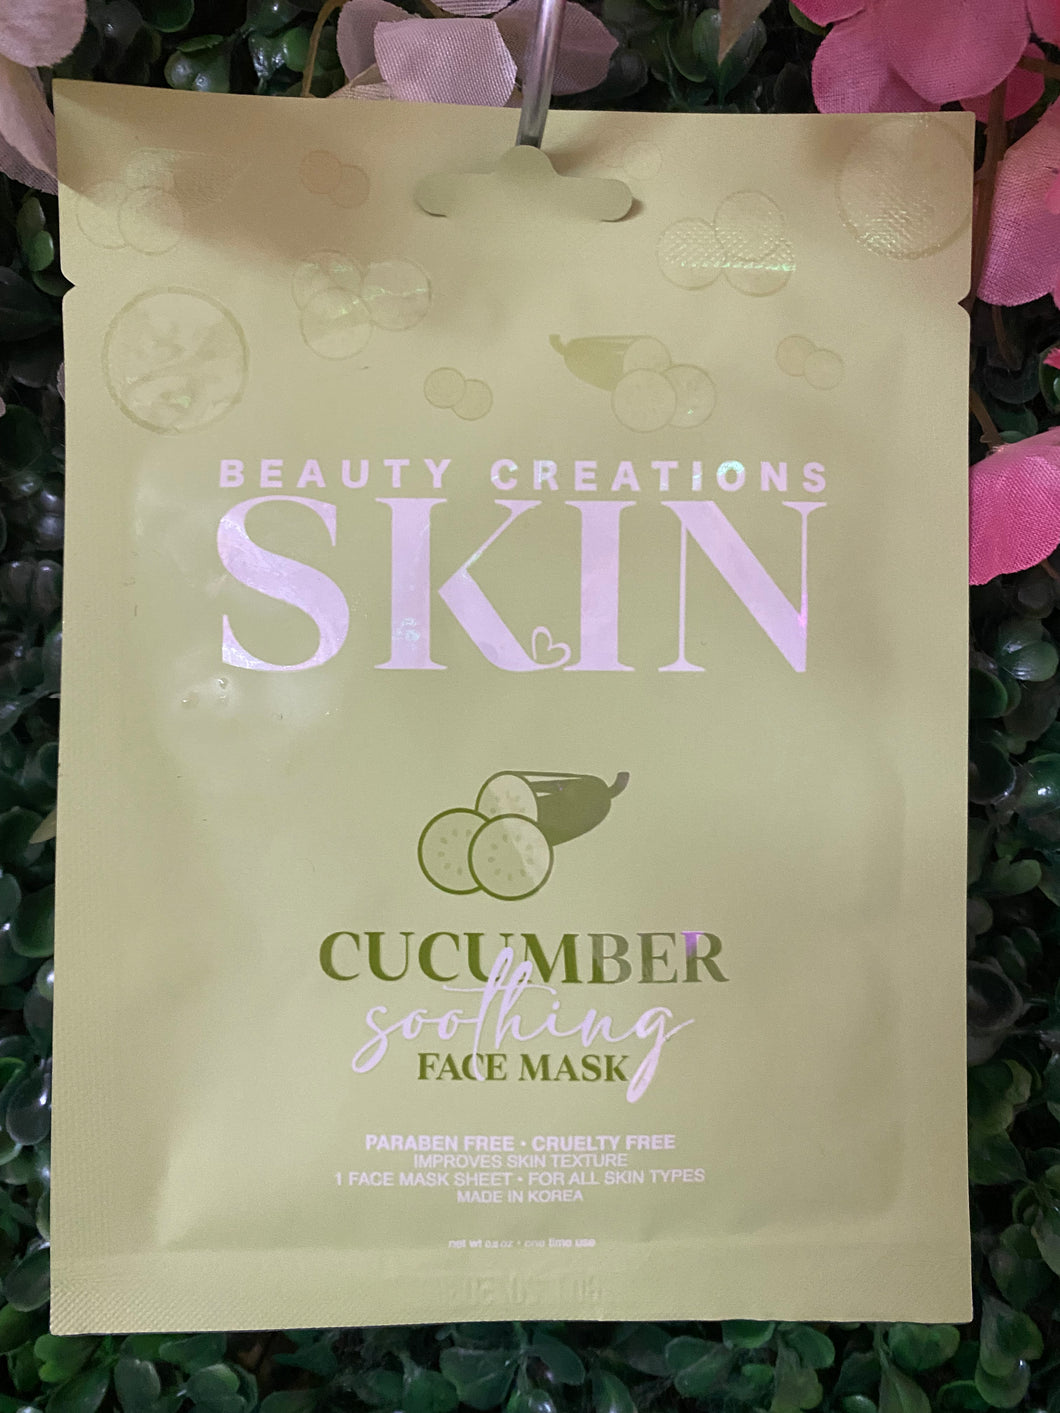 Beauty Creations Skin Facemask “Cucumber”